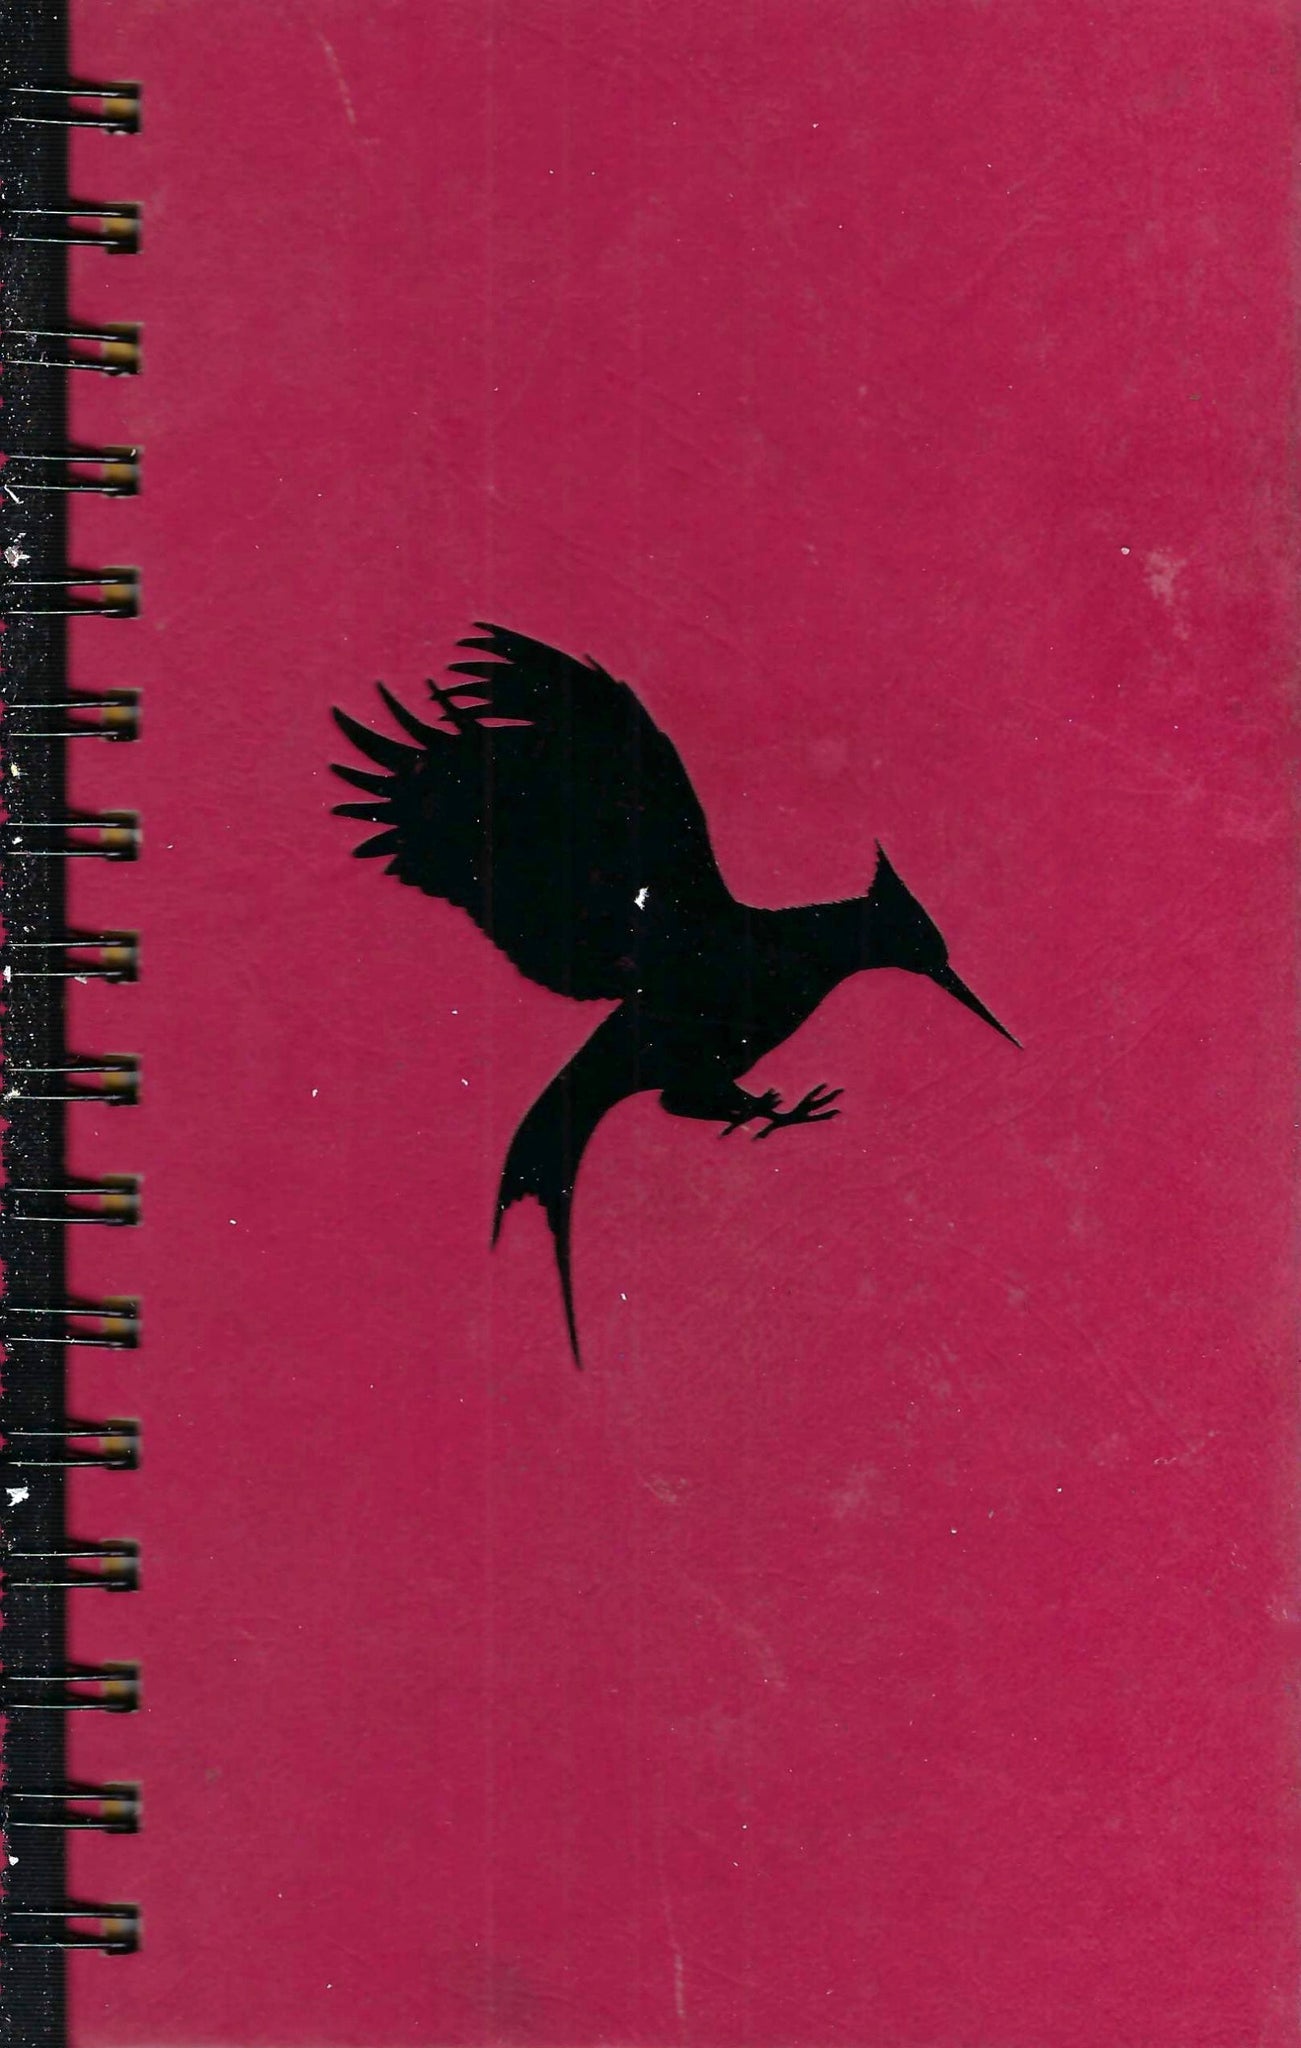 "Catching Fire" Journal by Attic Journals